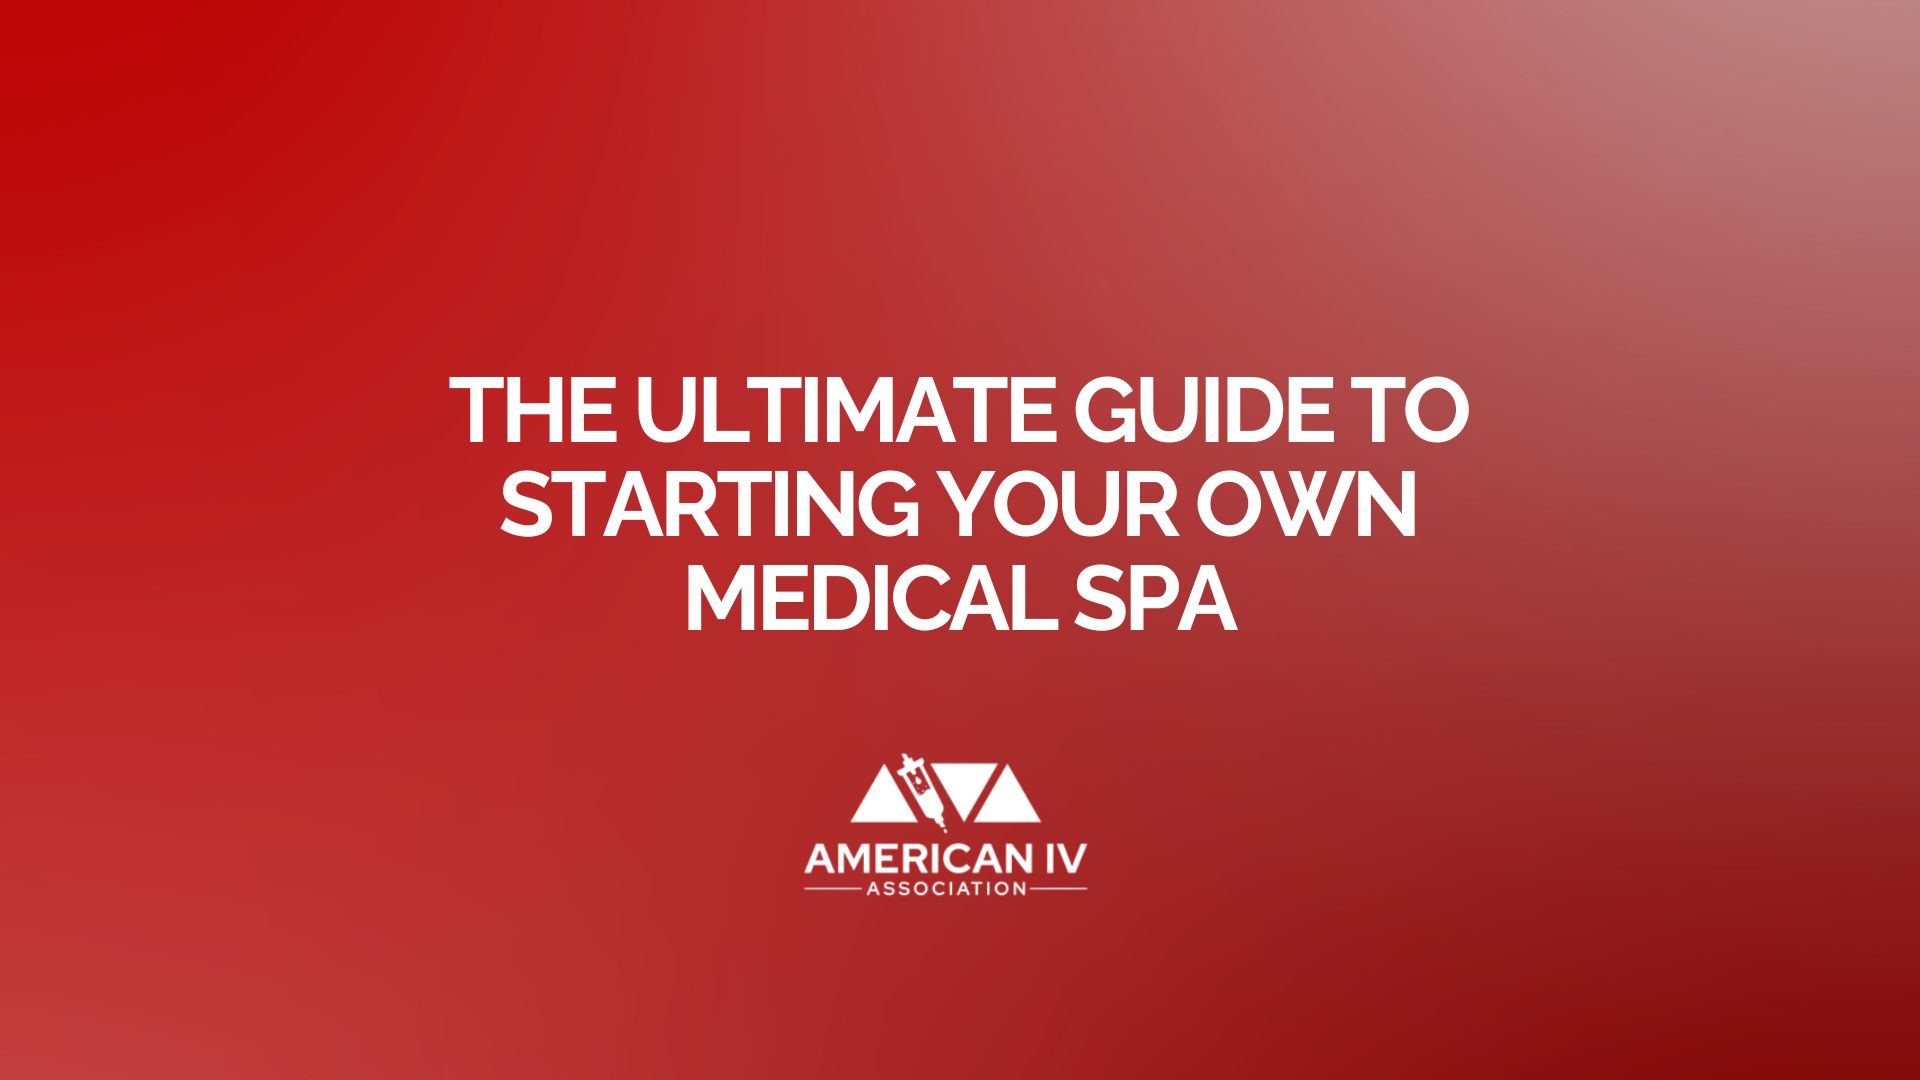 The Ultimate Guide to Starting Your Own Medical Spa